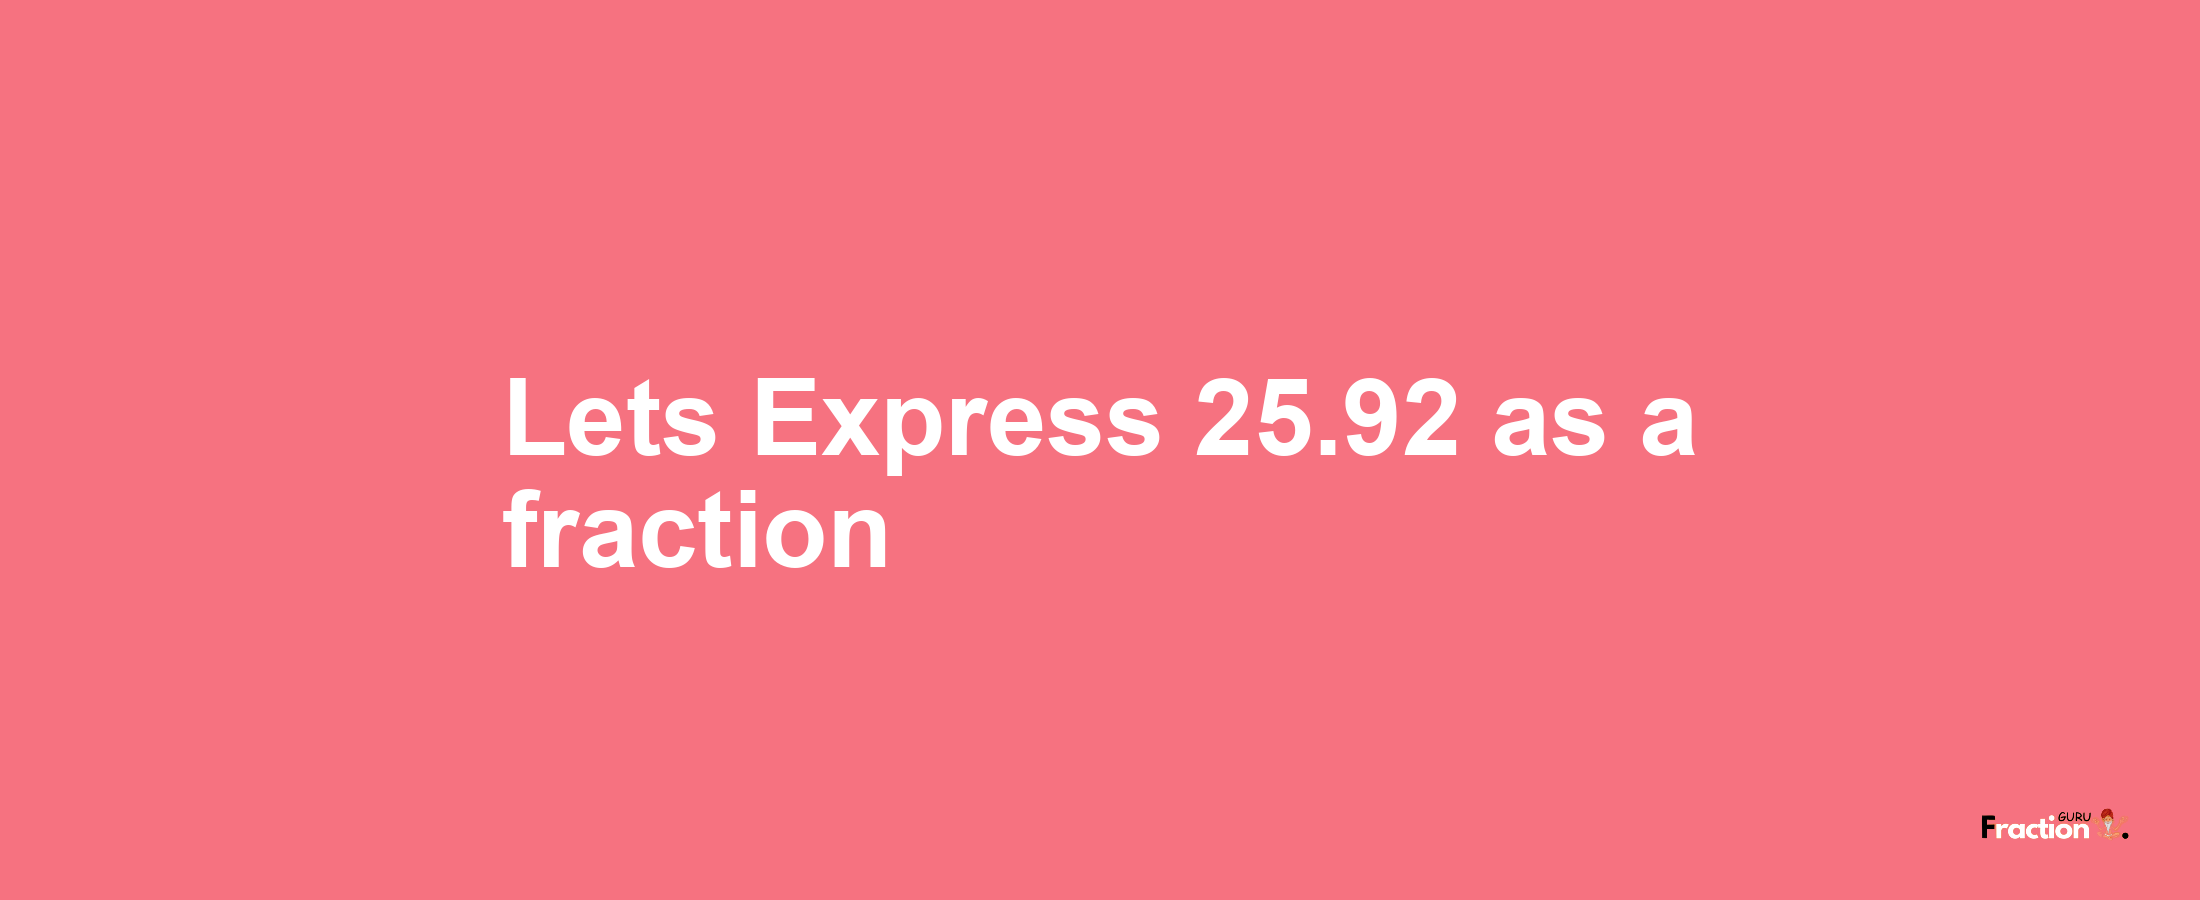 Lets Express 25.92 as afraction